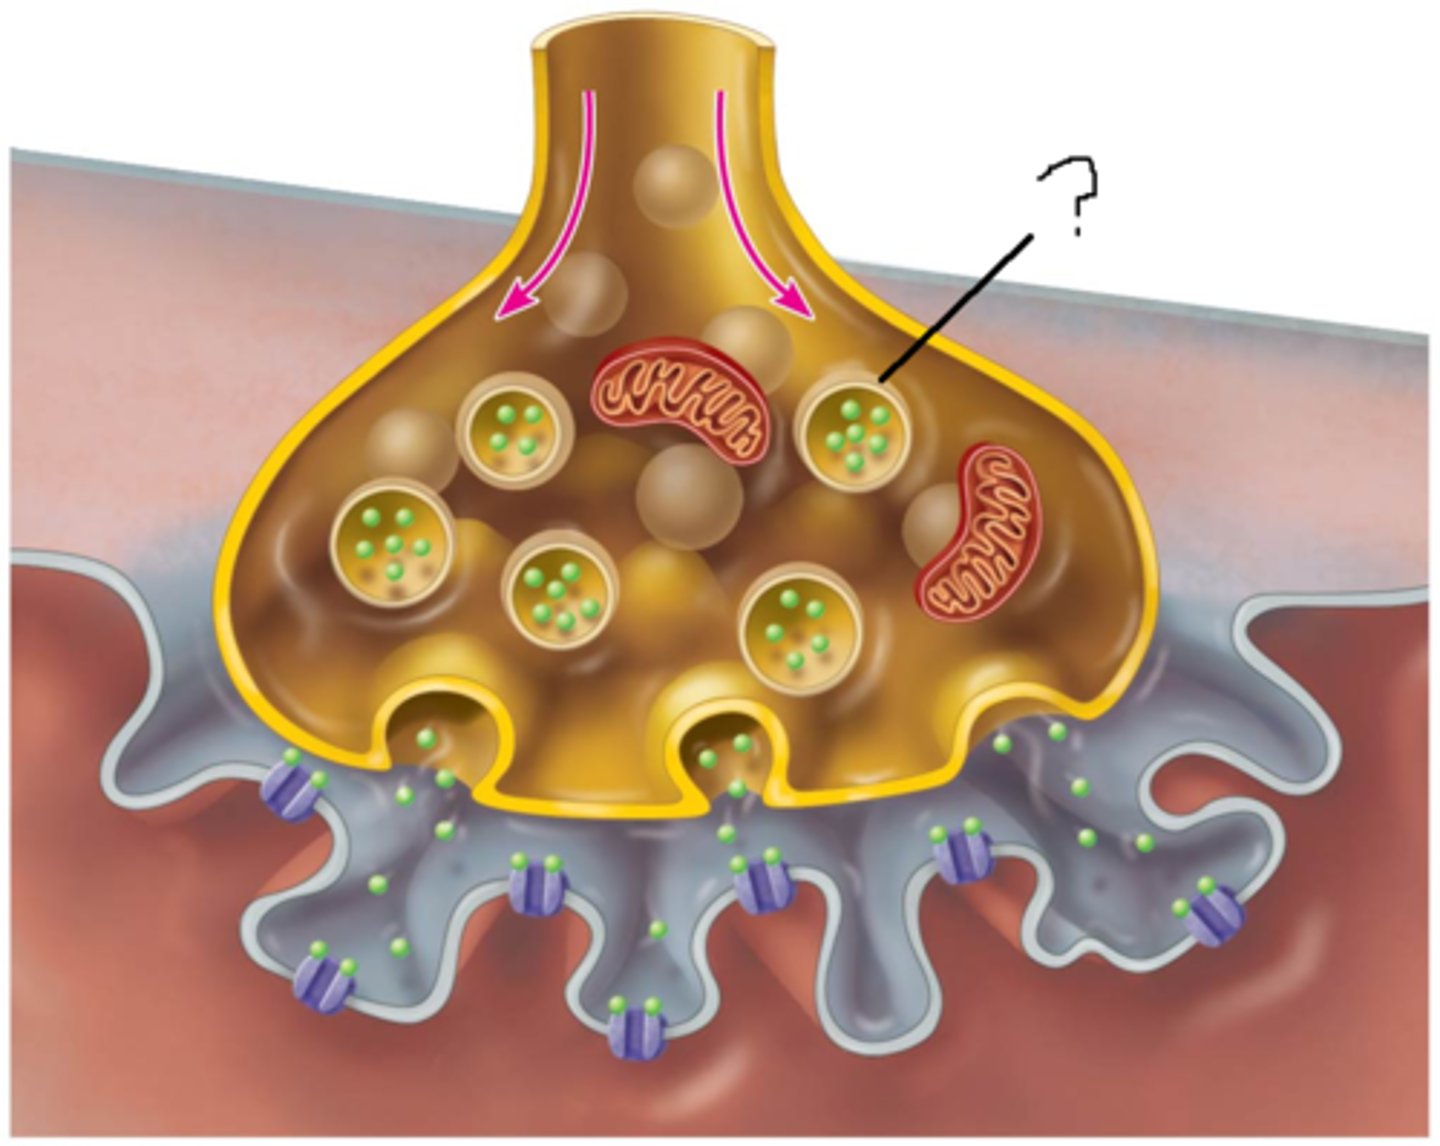 <p>small pockets or sacs located in terminal buttons that contain a neurotransmitter</p>